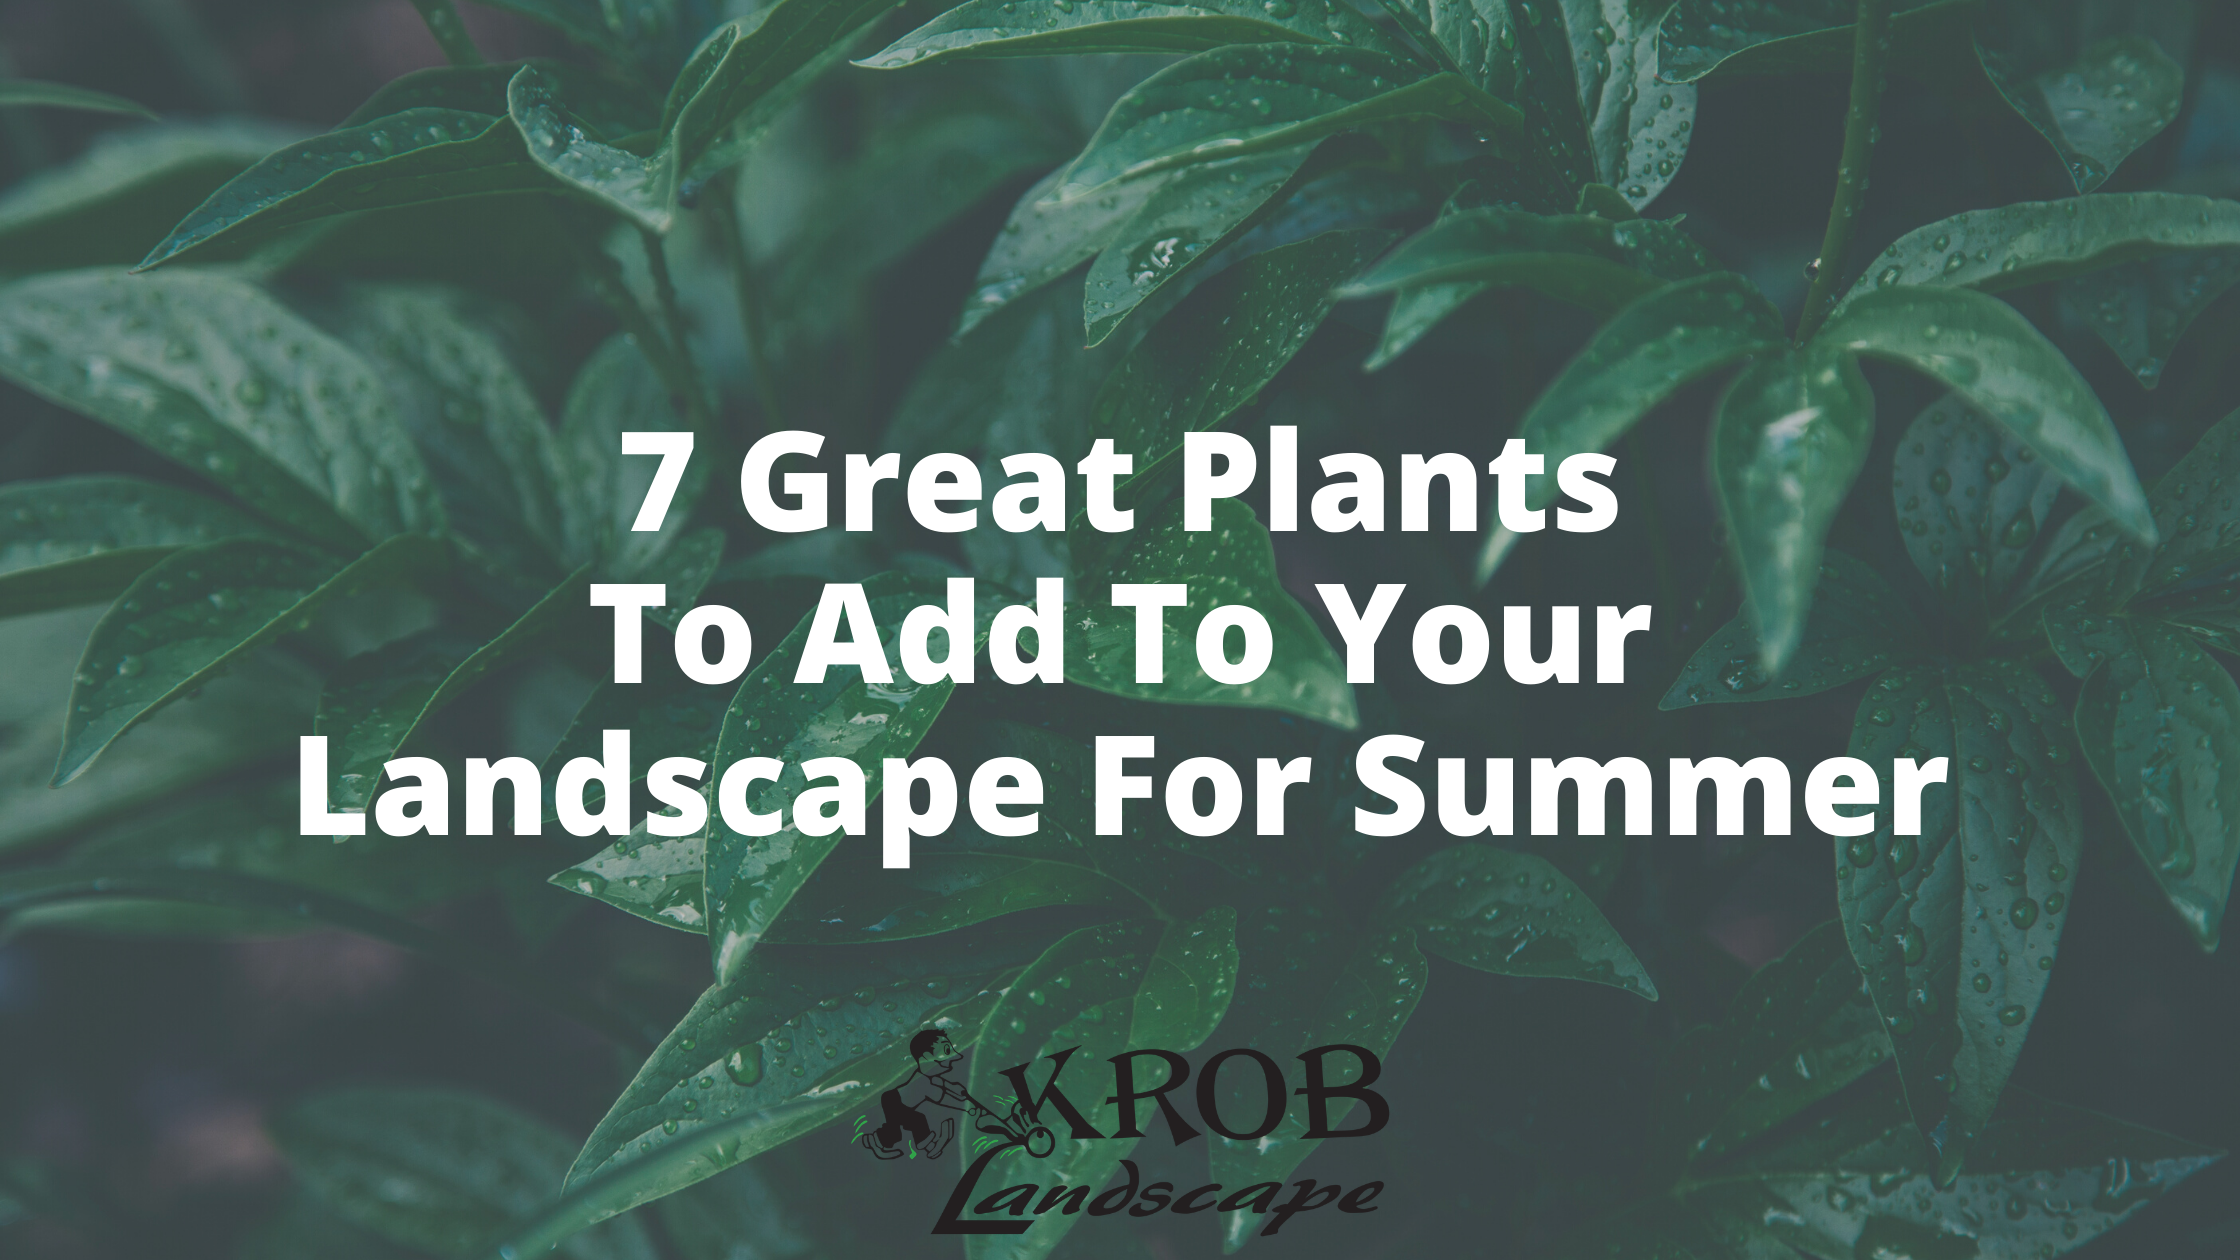 7 Great Plants To Add To Your Landscape For Summer.png